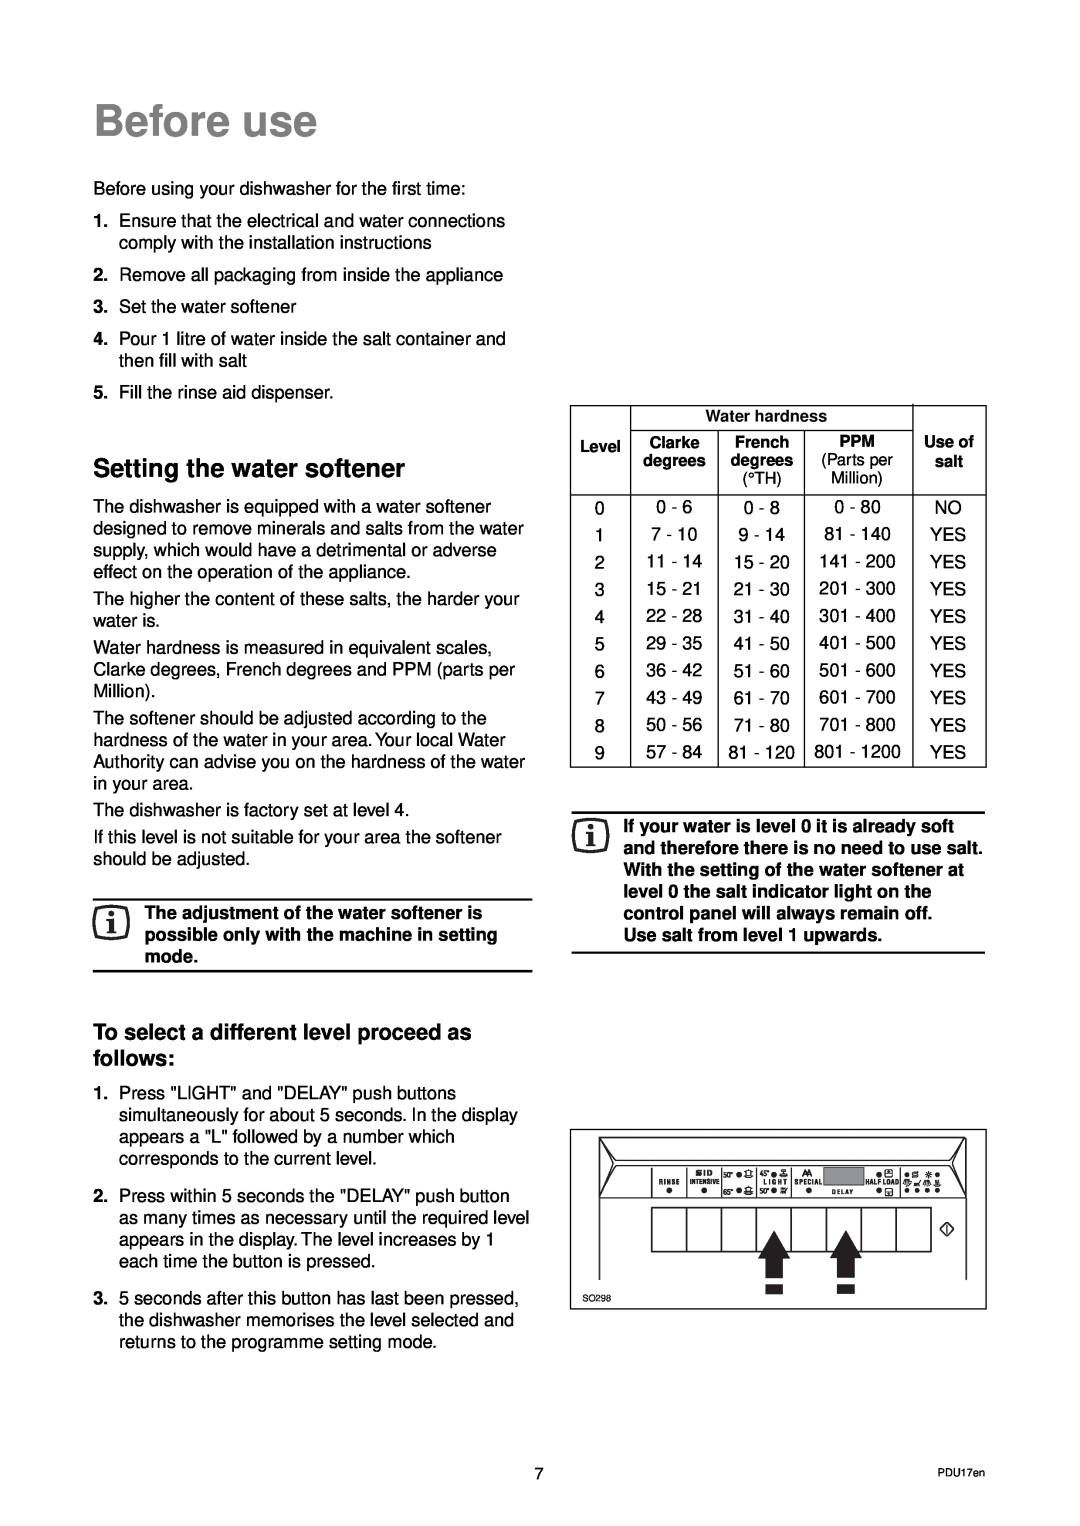 Zanussi DES 959 manual Before use, Setting the water softener, To select a different level proceed as follows 